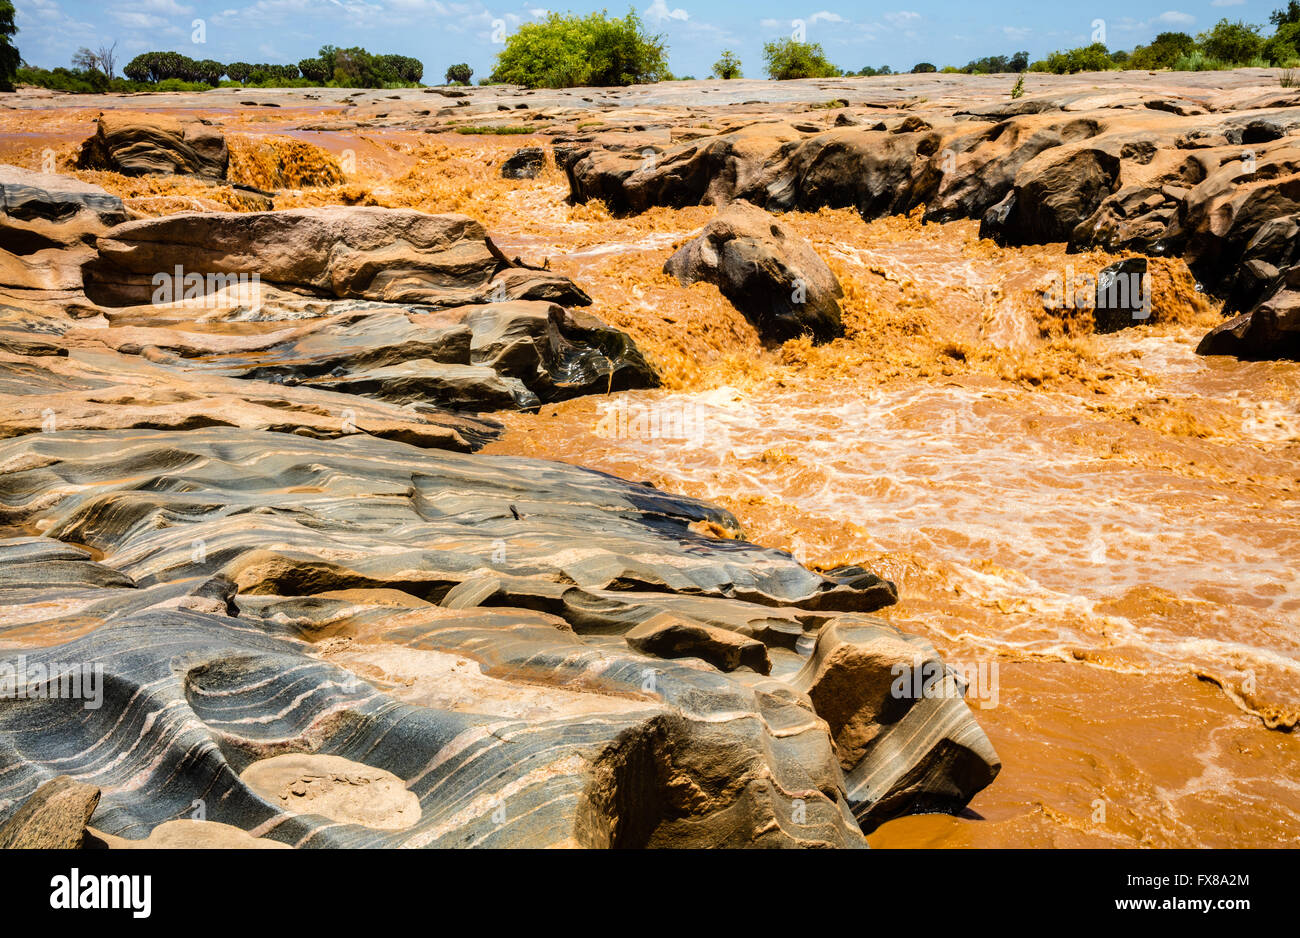 Lugards Falls on the Galana River in East Tsavo National Park Kenya coloured red with silt after heavy rain Stock Photo